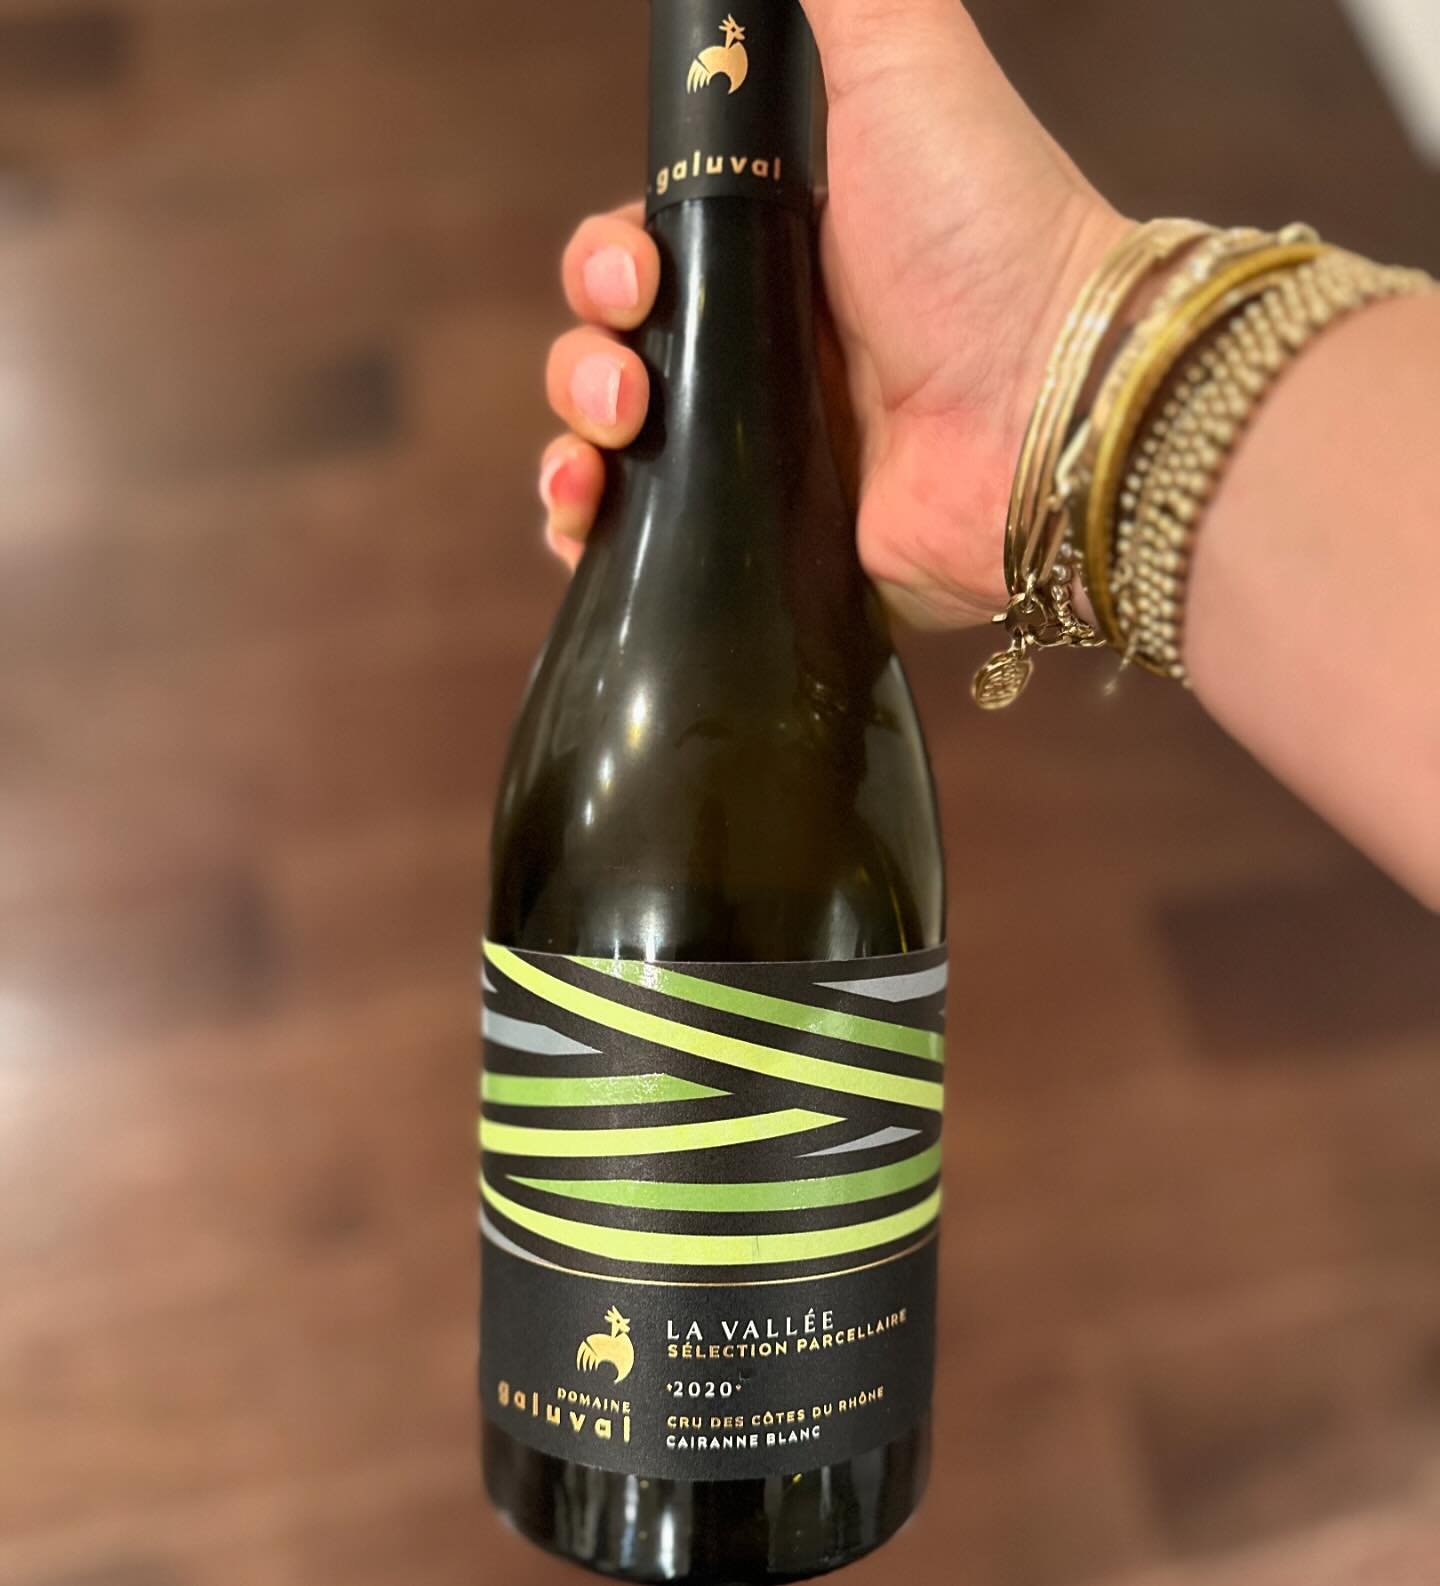 White Cairanne for you this Wednesday!

This 2020 @domainedegaluval Cairanne La Vallee is super cool. It&rsquo;s a white wine from the Rh&ocirc;ne Valley, made with a blend of 51% Roussanne, 24% White Grenache, 15% Clairette, and 10% Viognier grapes.